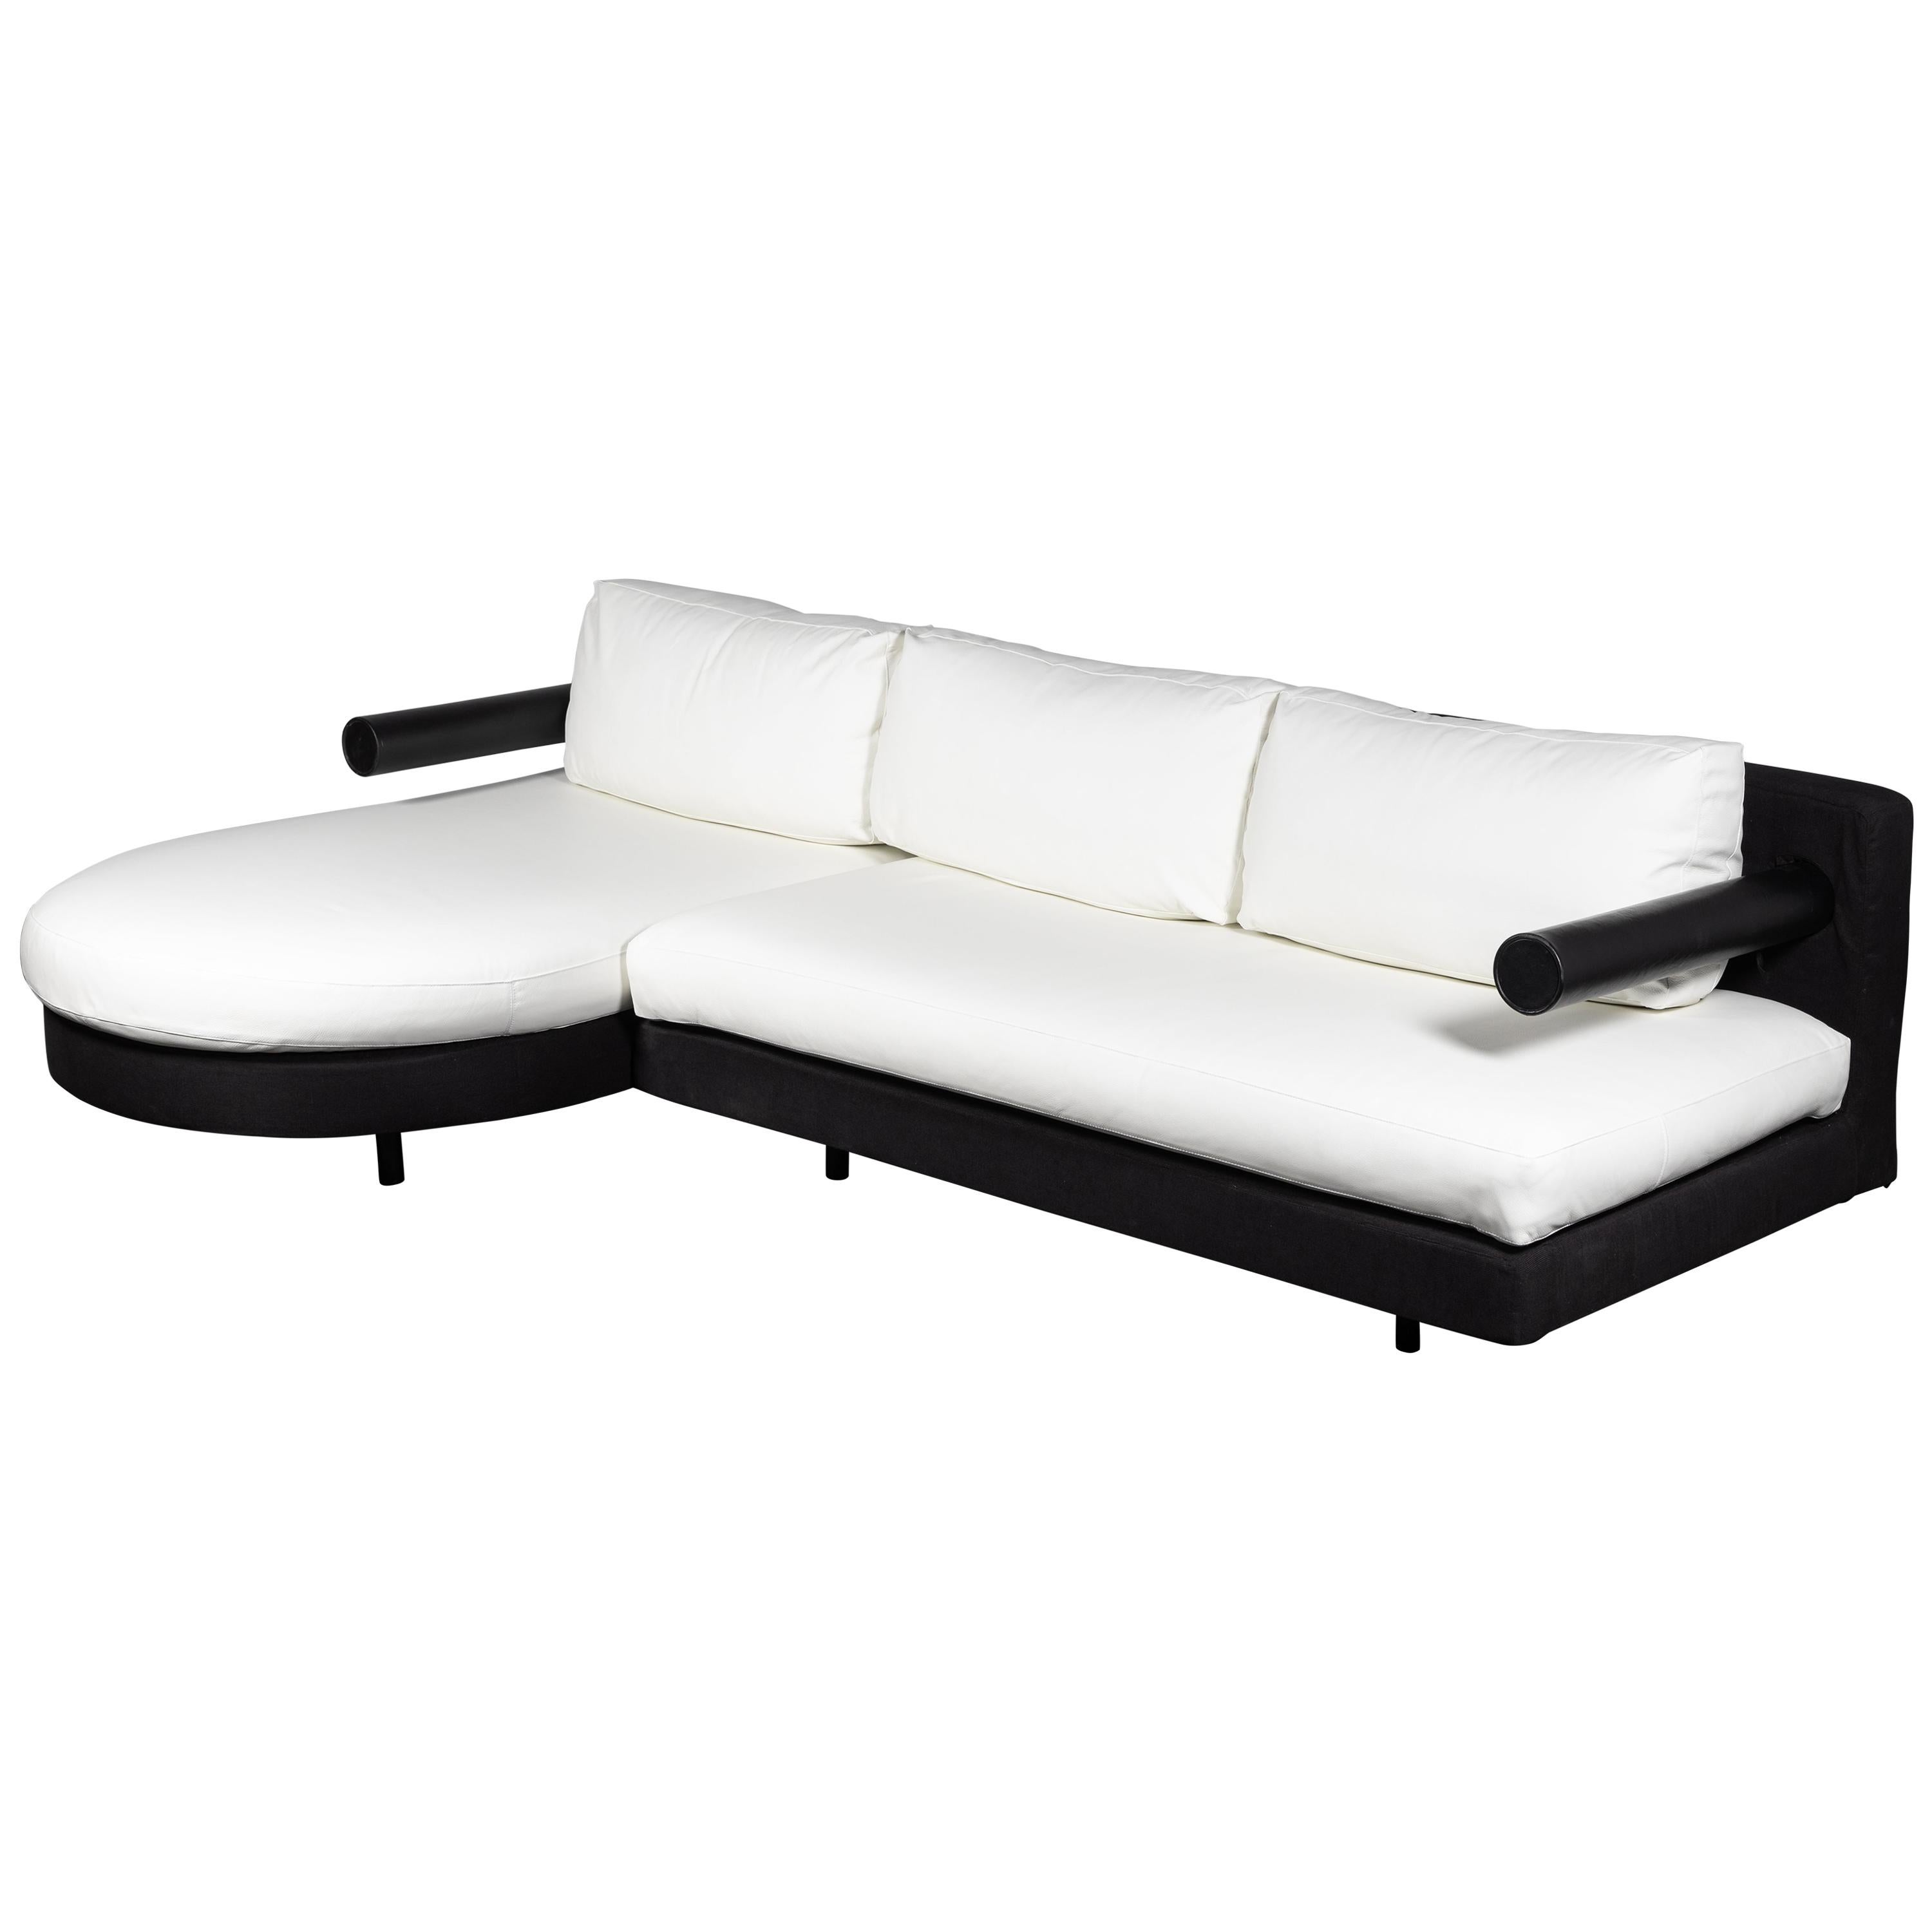 "Sity" Sectional Sofa in White Leather by Citterio for B&B Italia